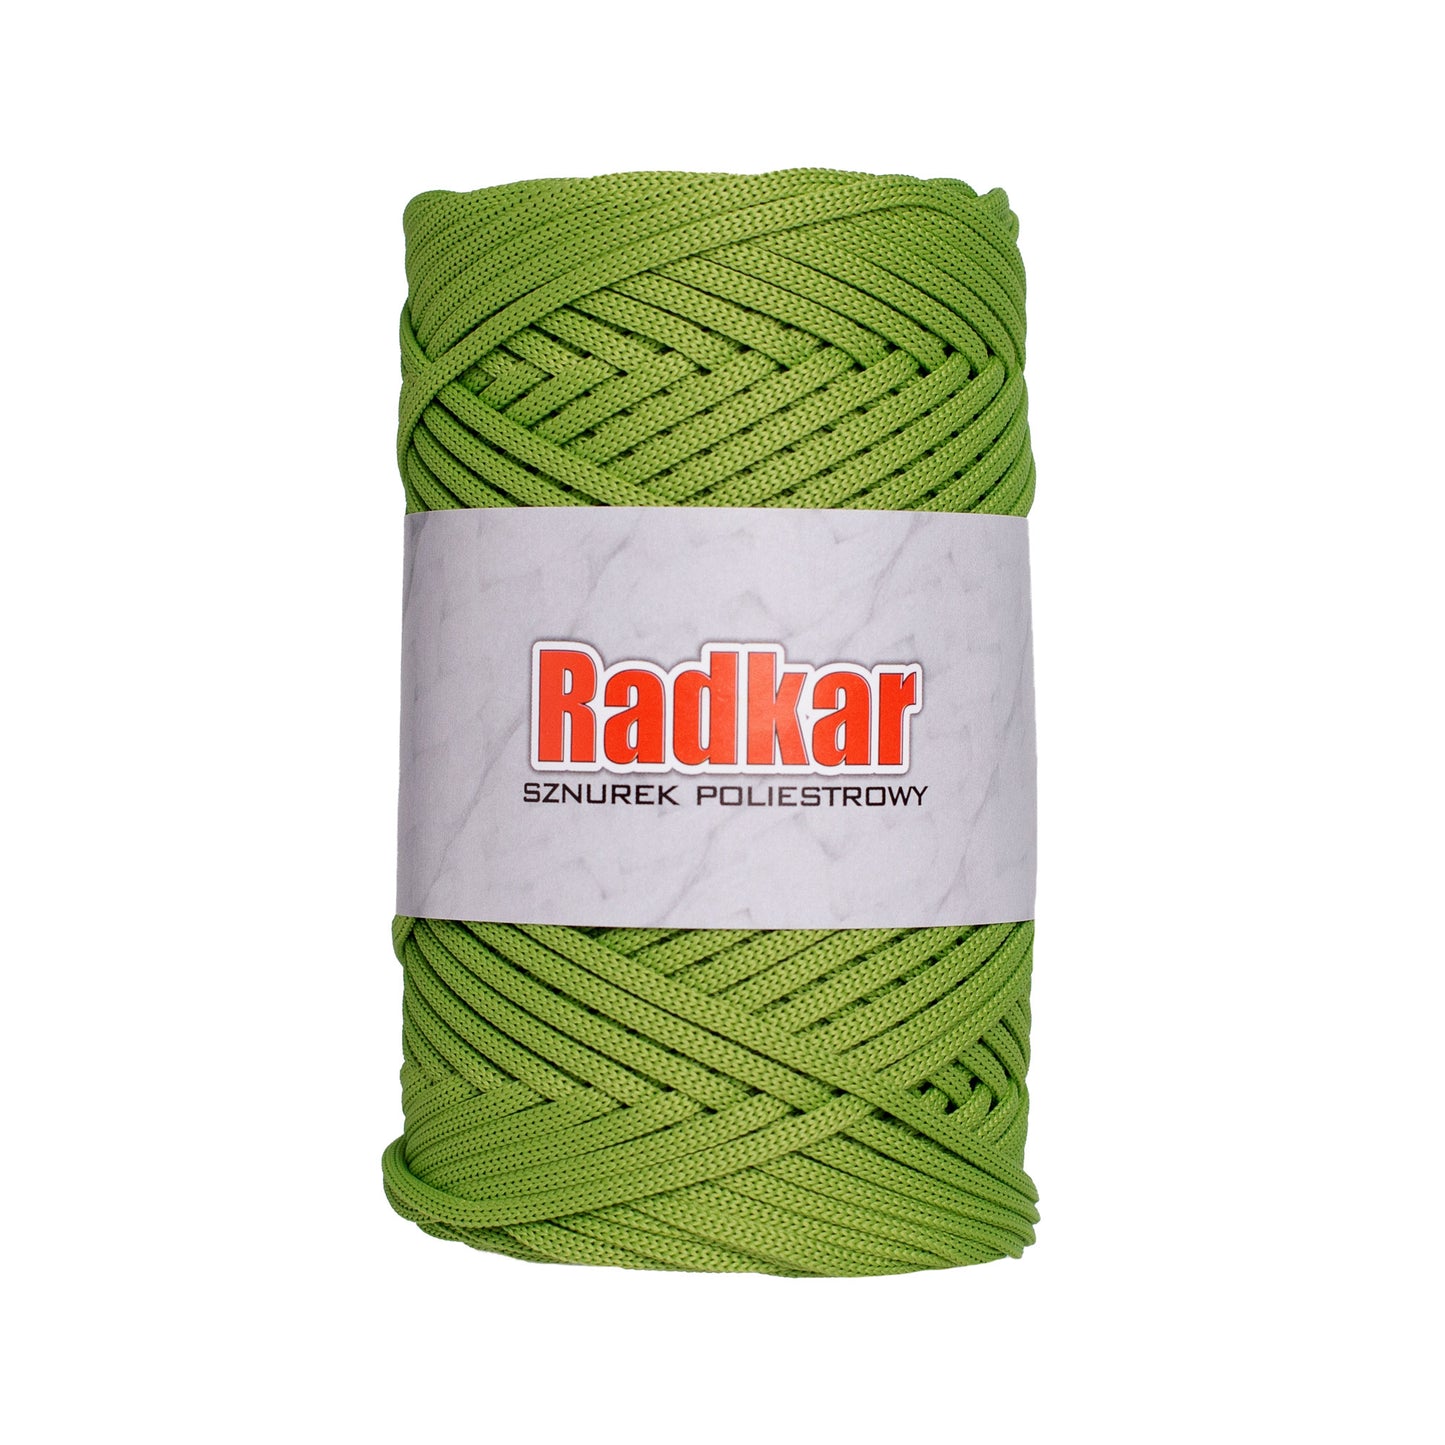 Pea Green 3mm polyester cord